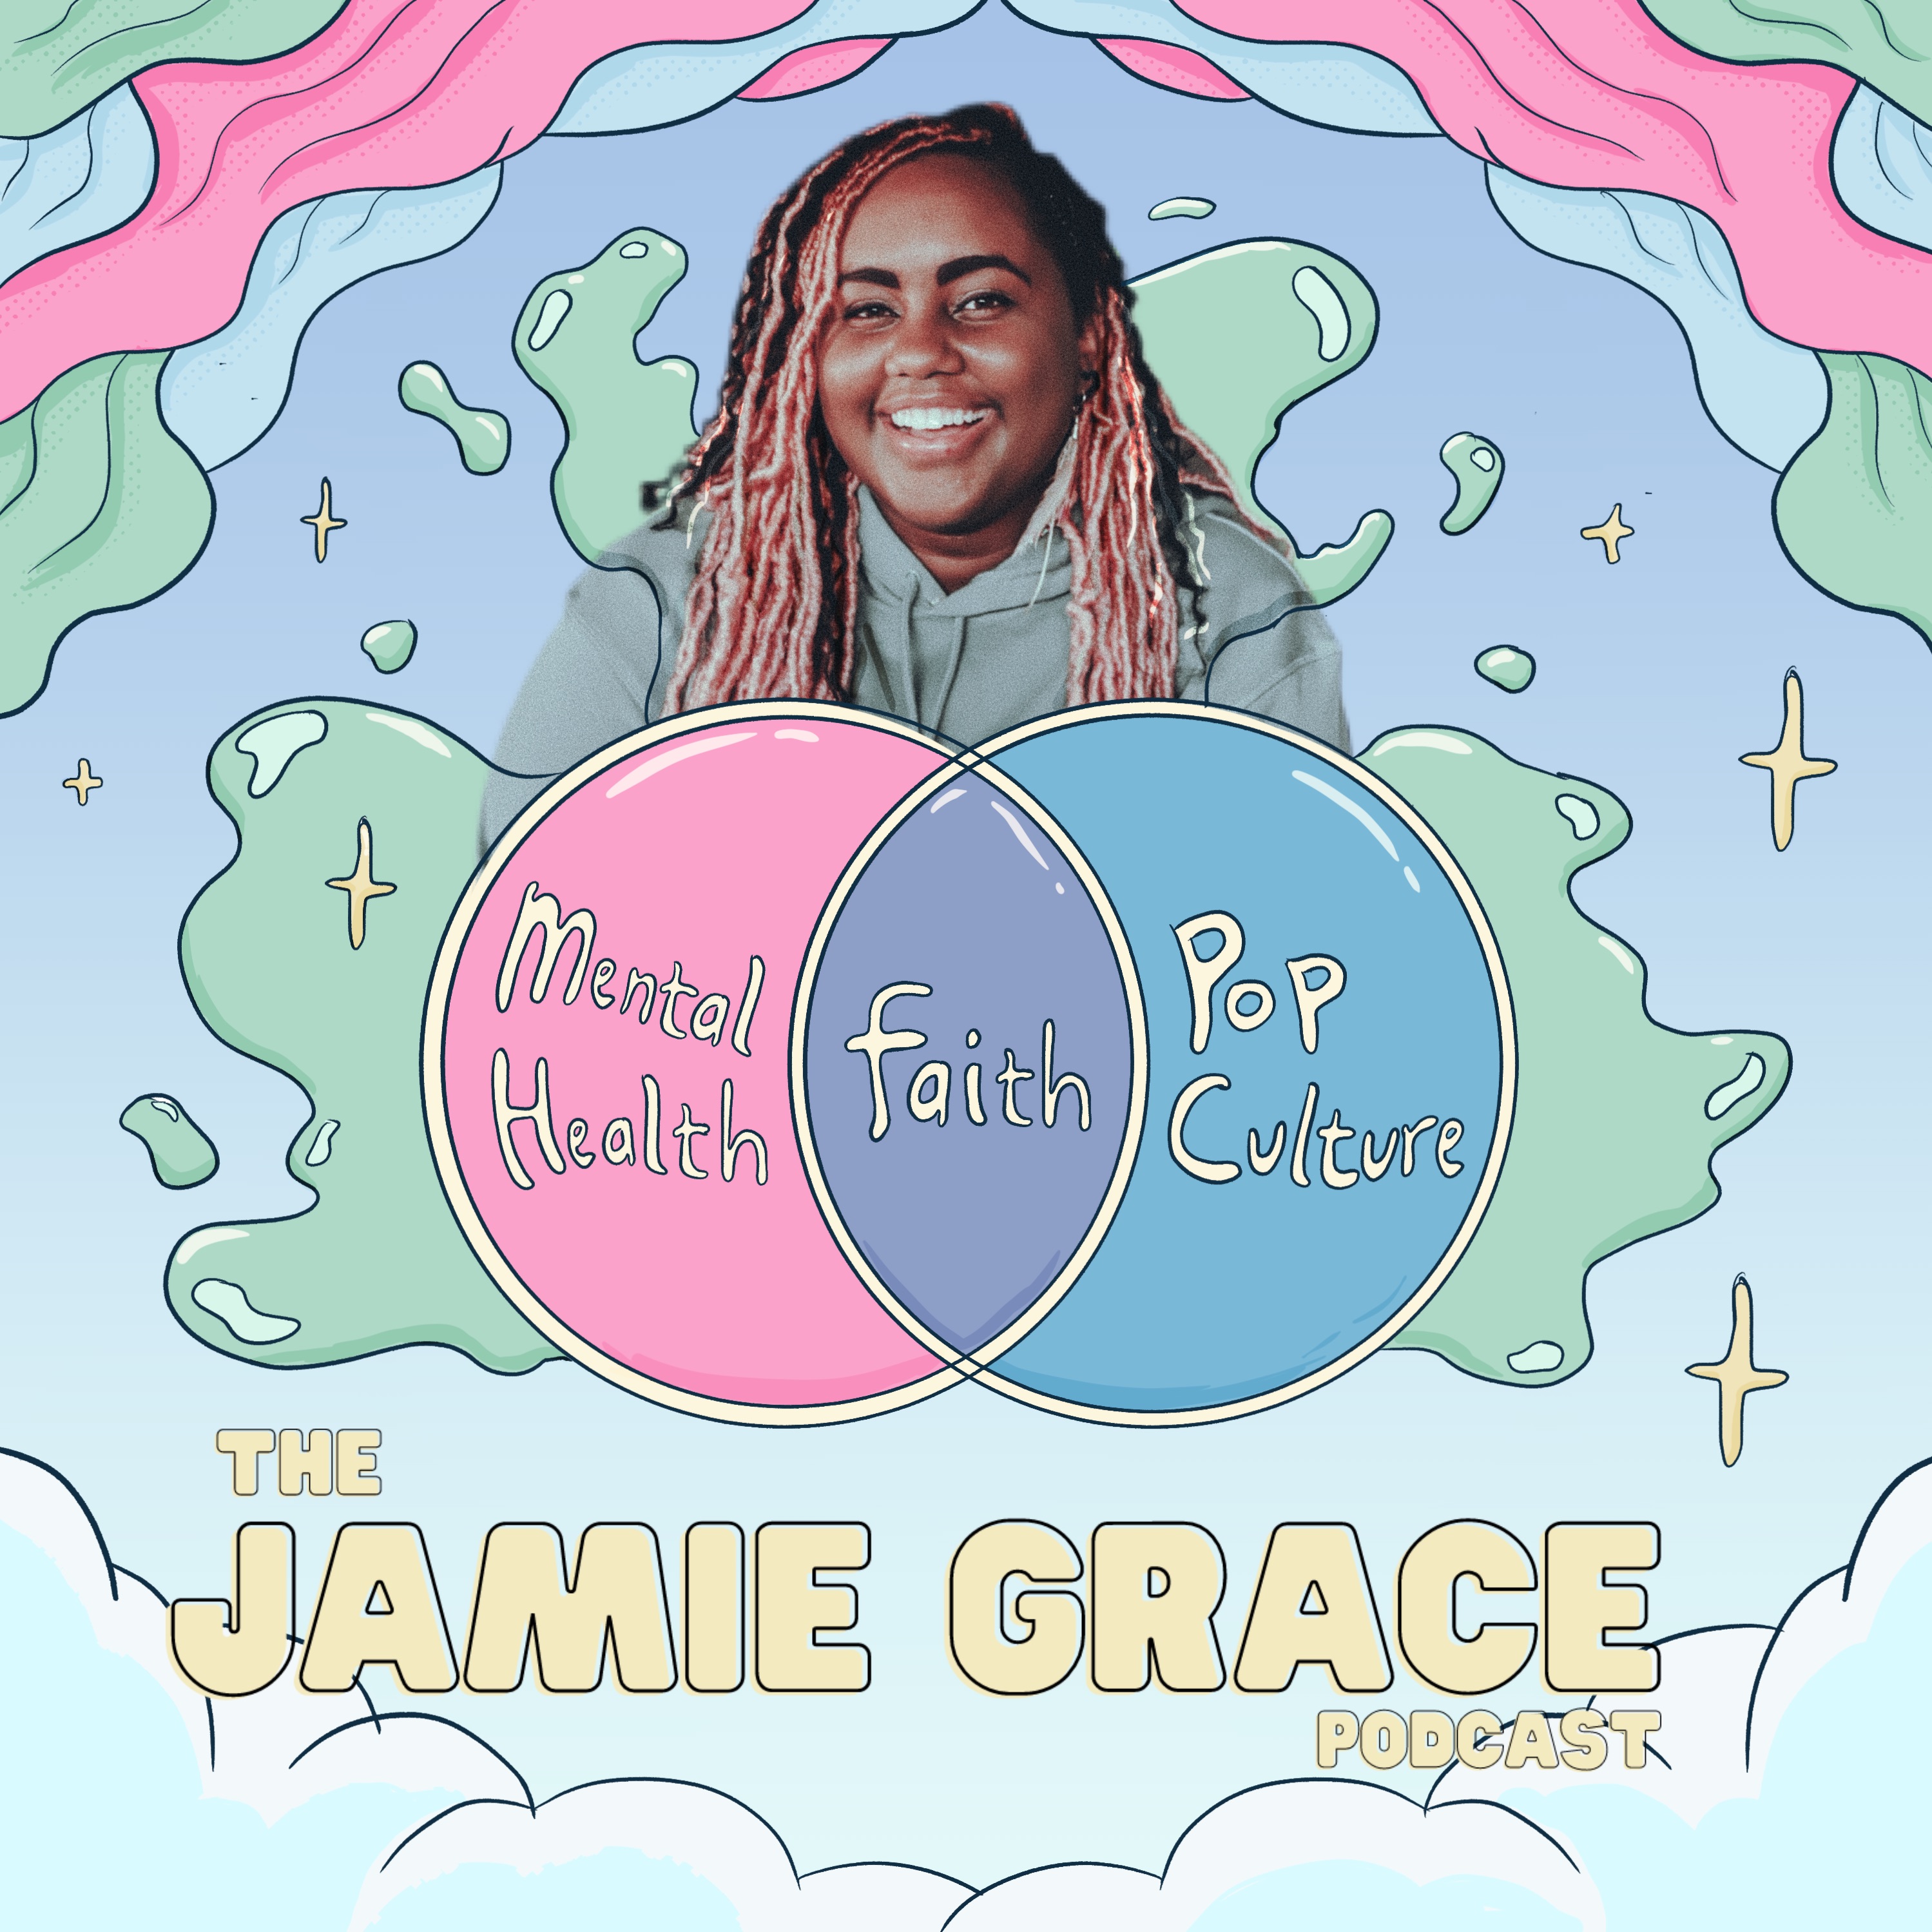 The Jamie Grace Podcast podcast show image